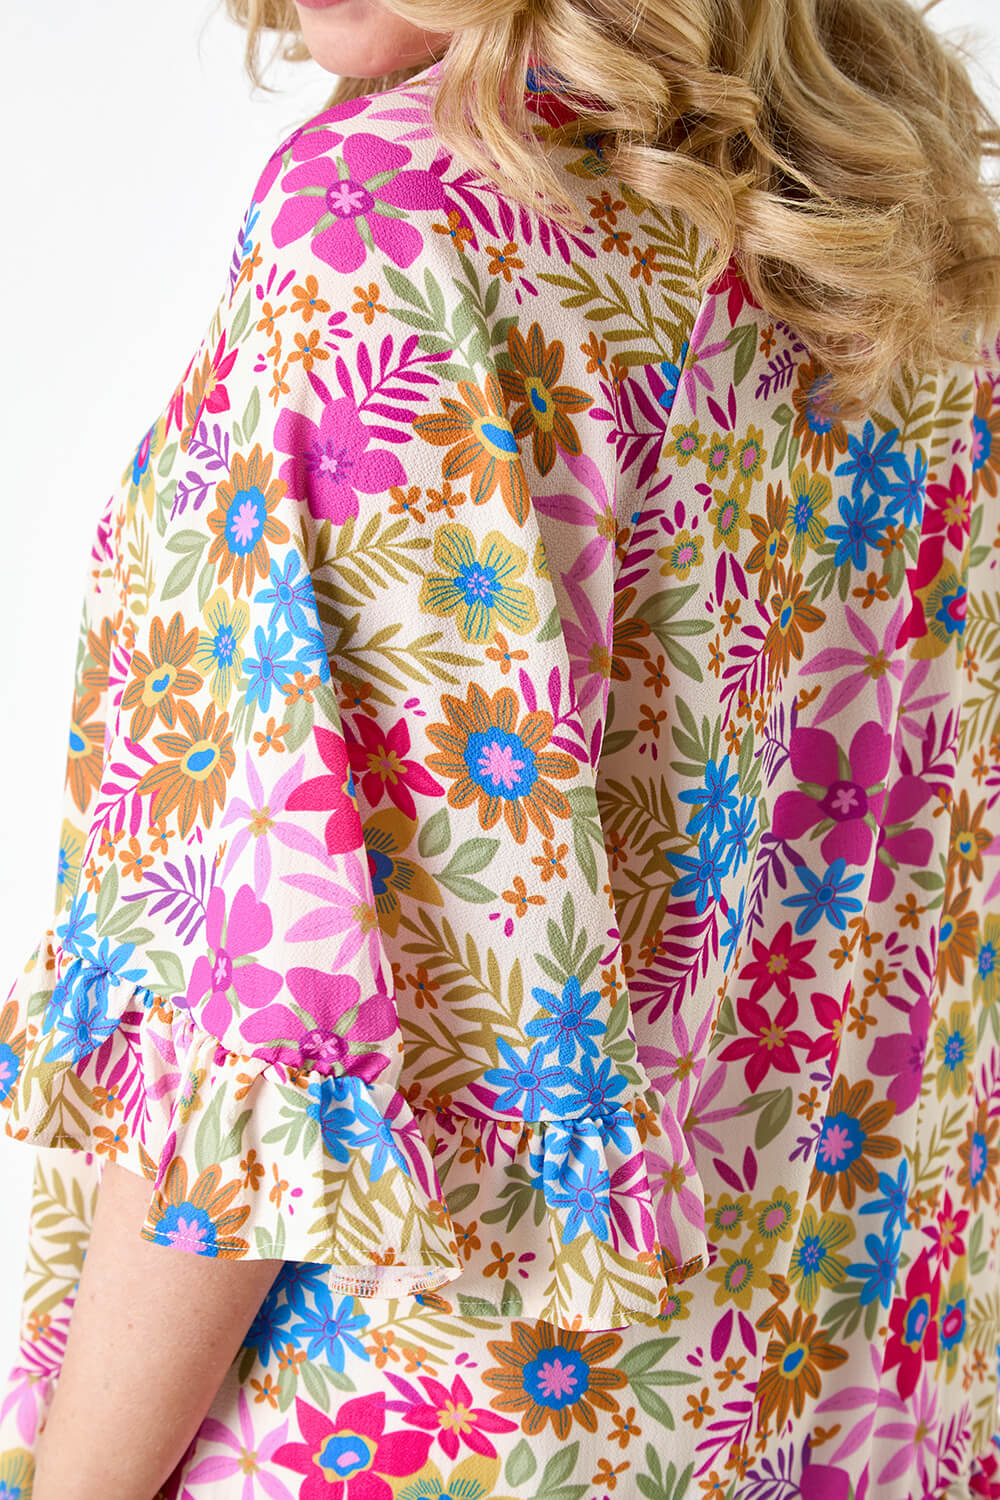 PINK Curve Floral Print Frill Detail Top, Image 5 of 5